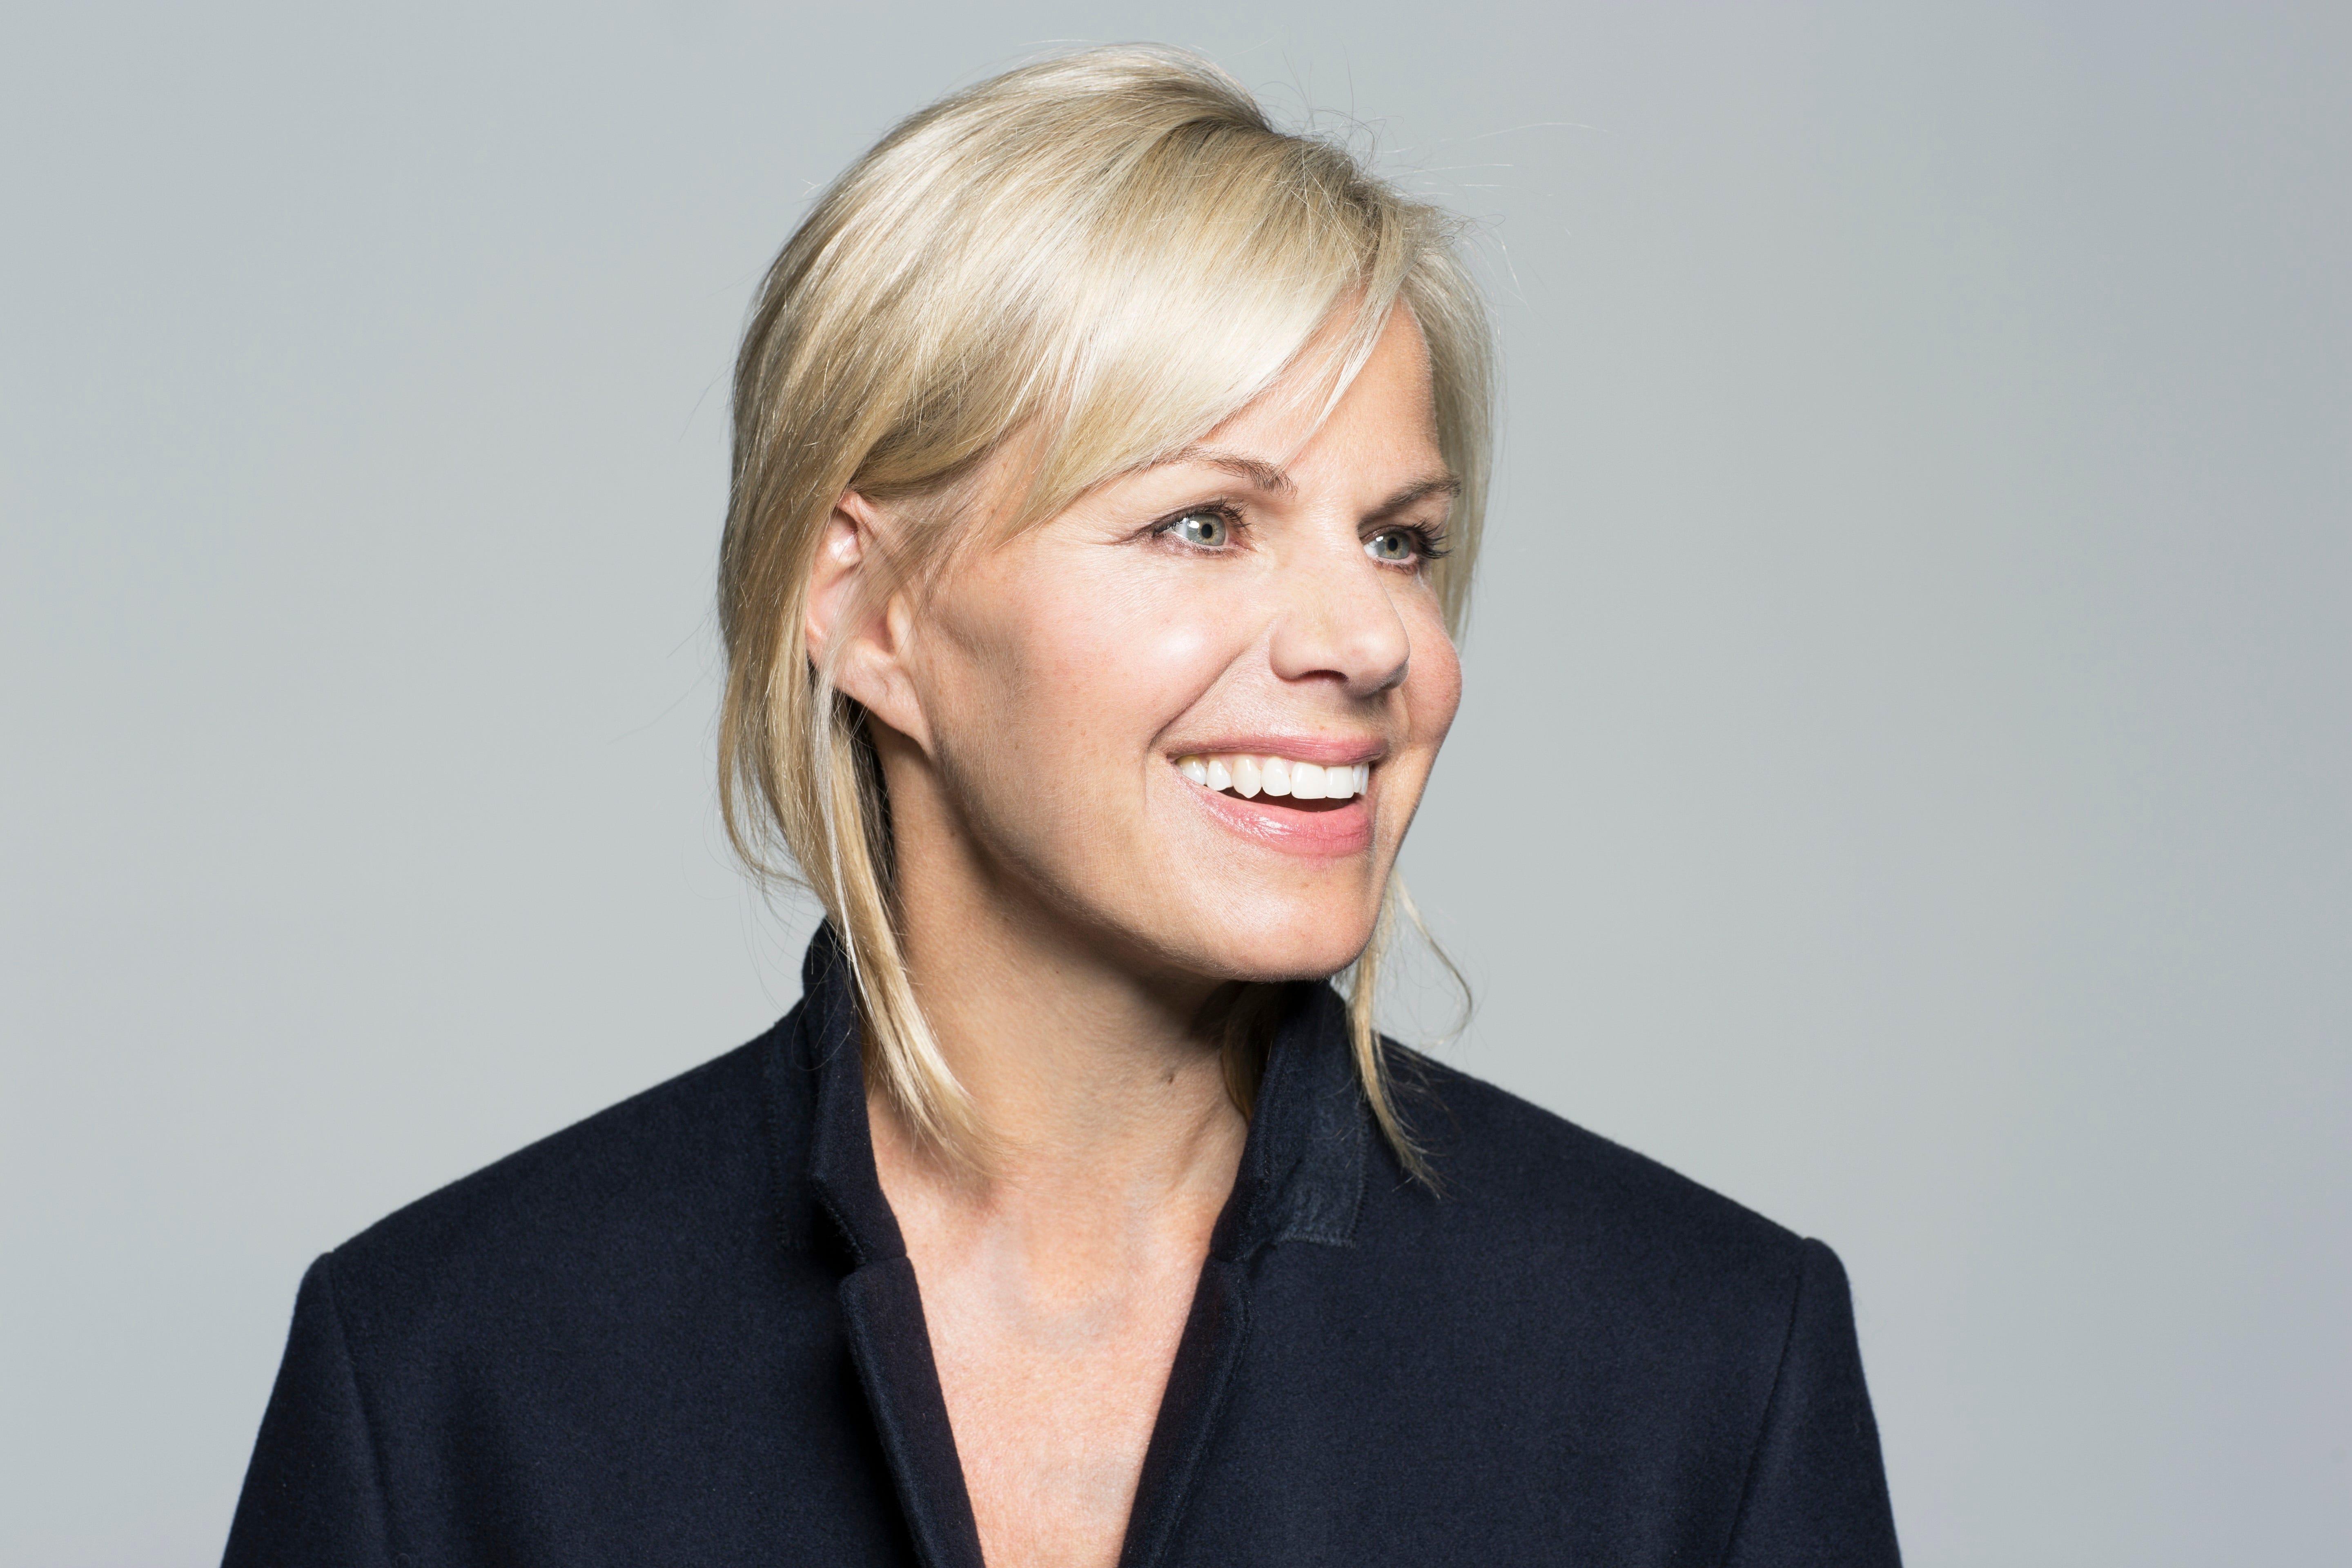 Gretchen Carlson will host Lifetime documentaries as part of A&E deal